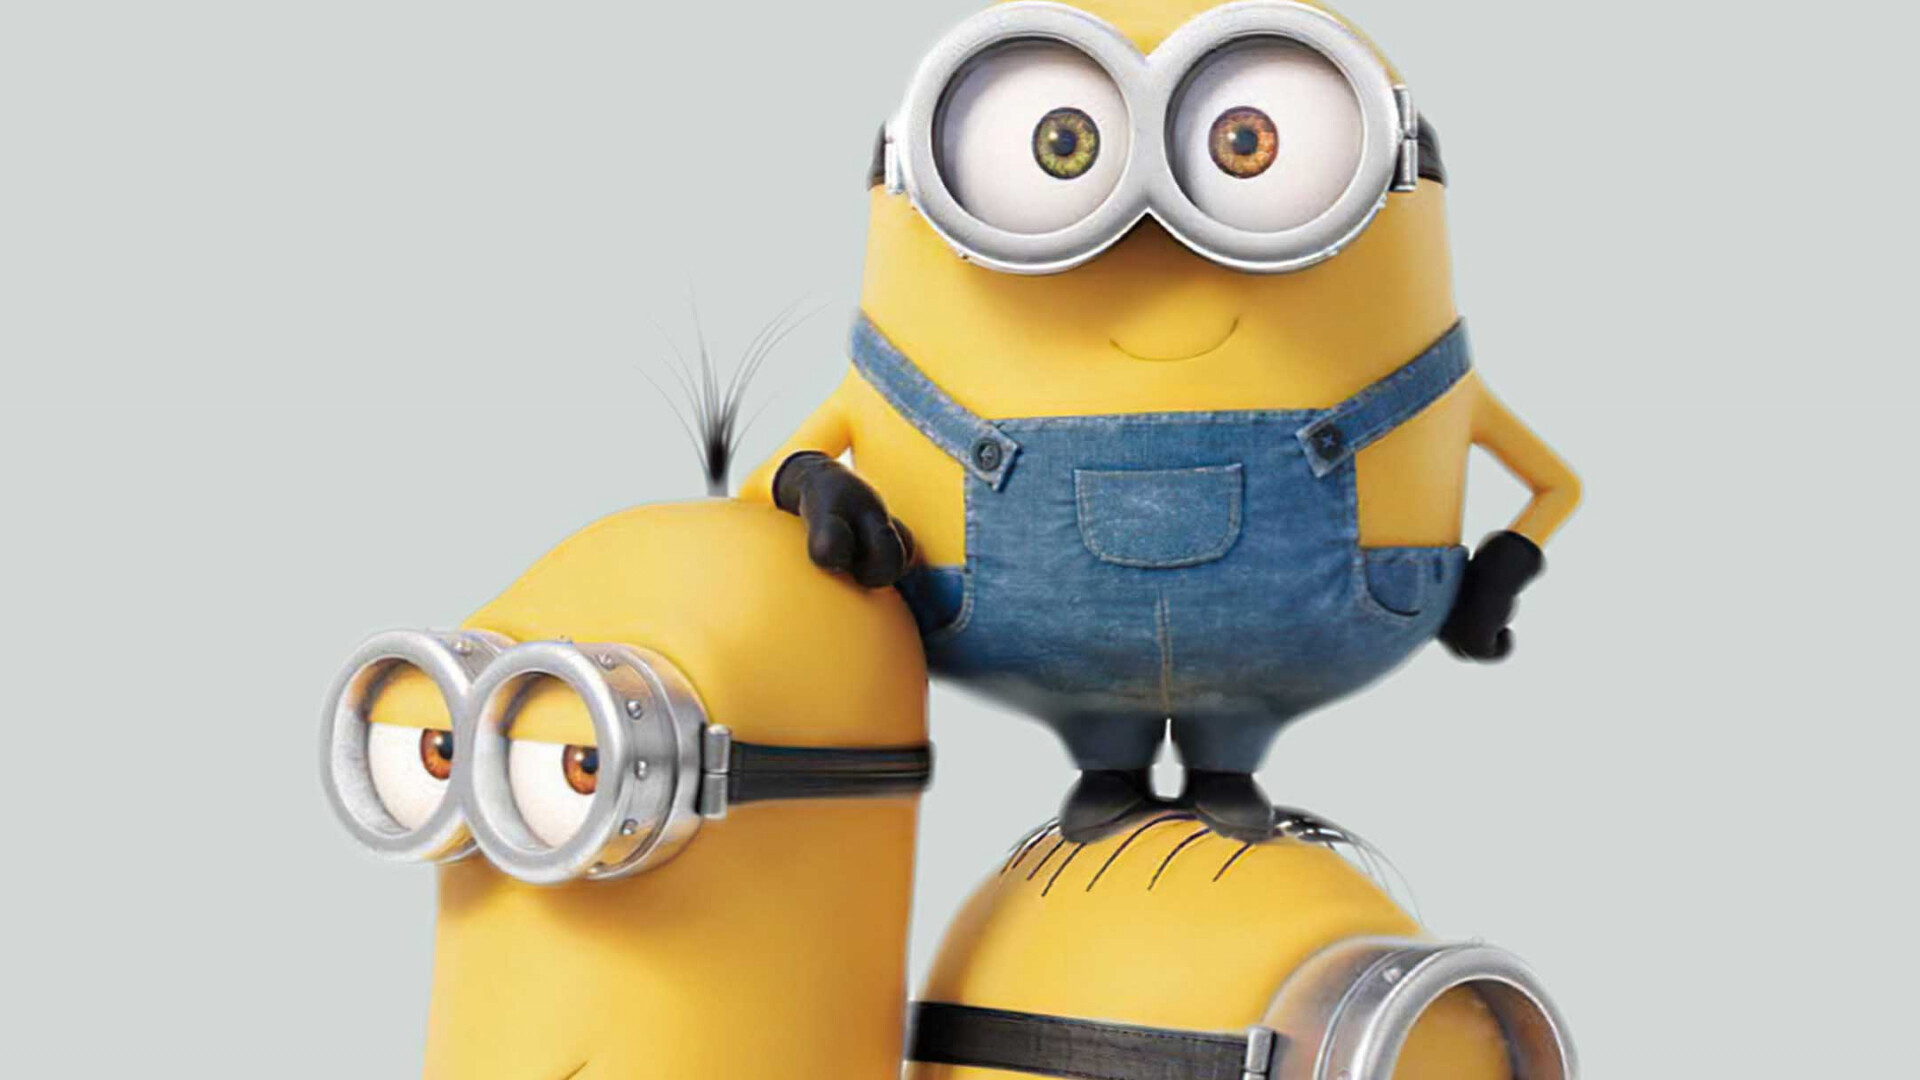 Minions: The Rise of Gru: A male species of fictional yellow creatures that appear in Illumination's Despicable Me franchise. 1920x1080 Full HD Wallpaper.